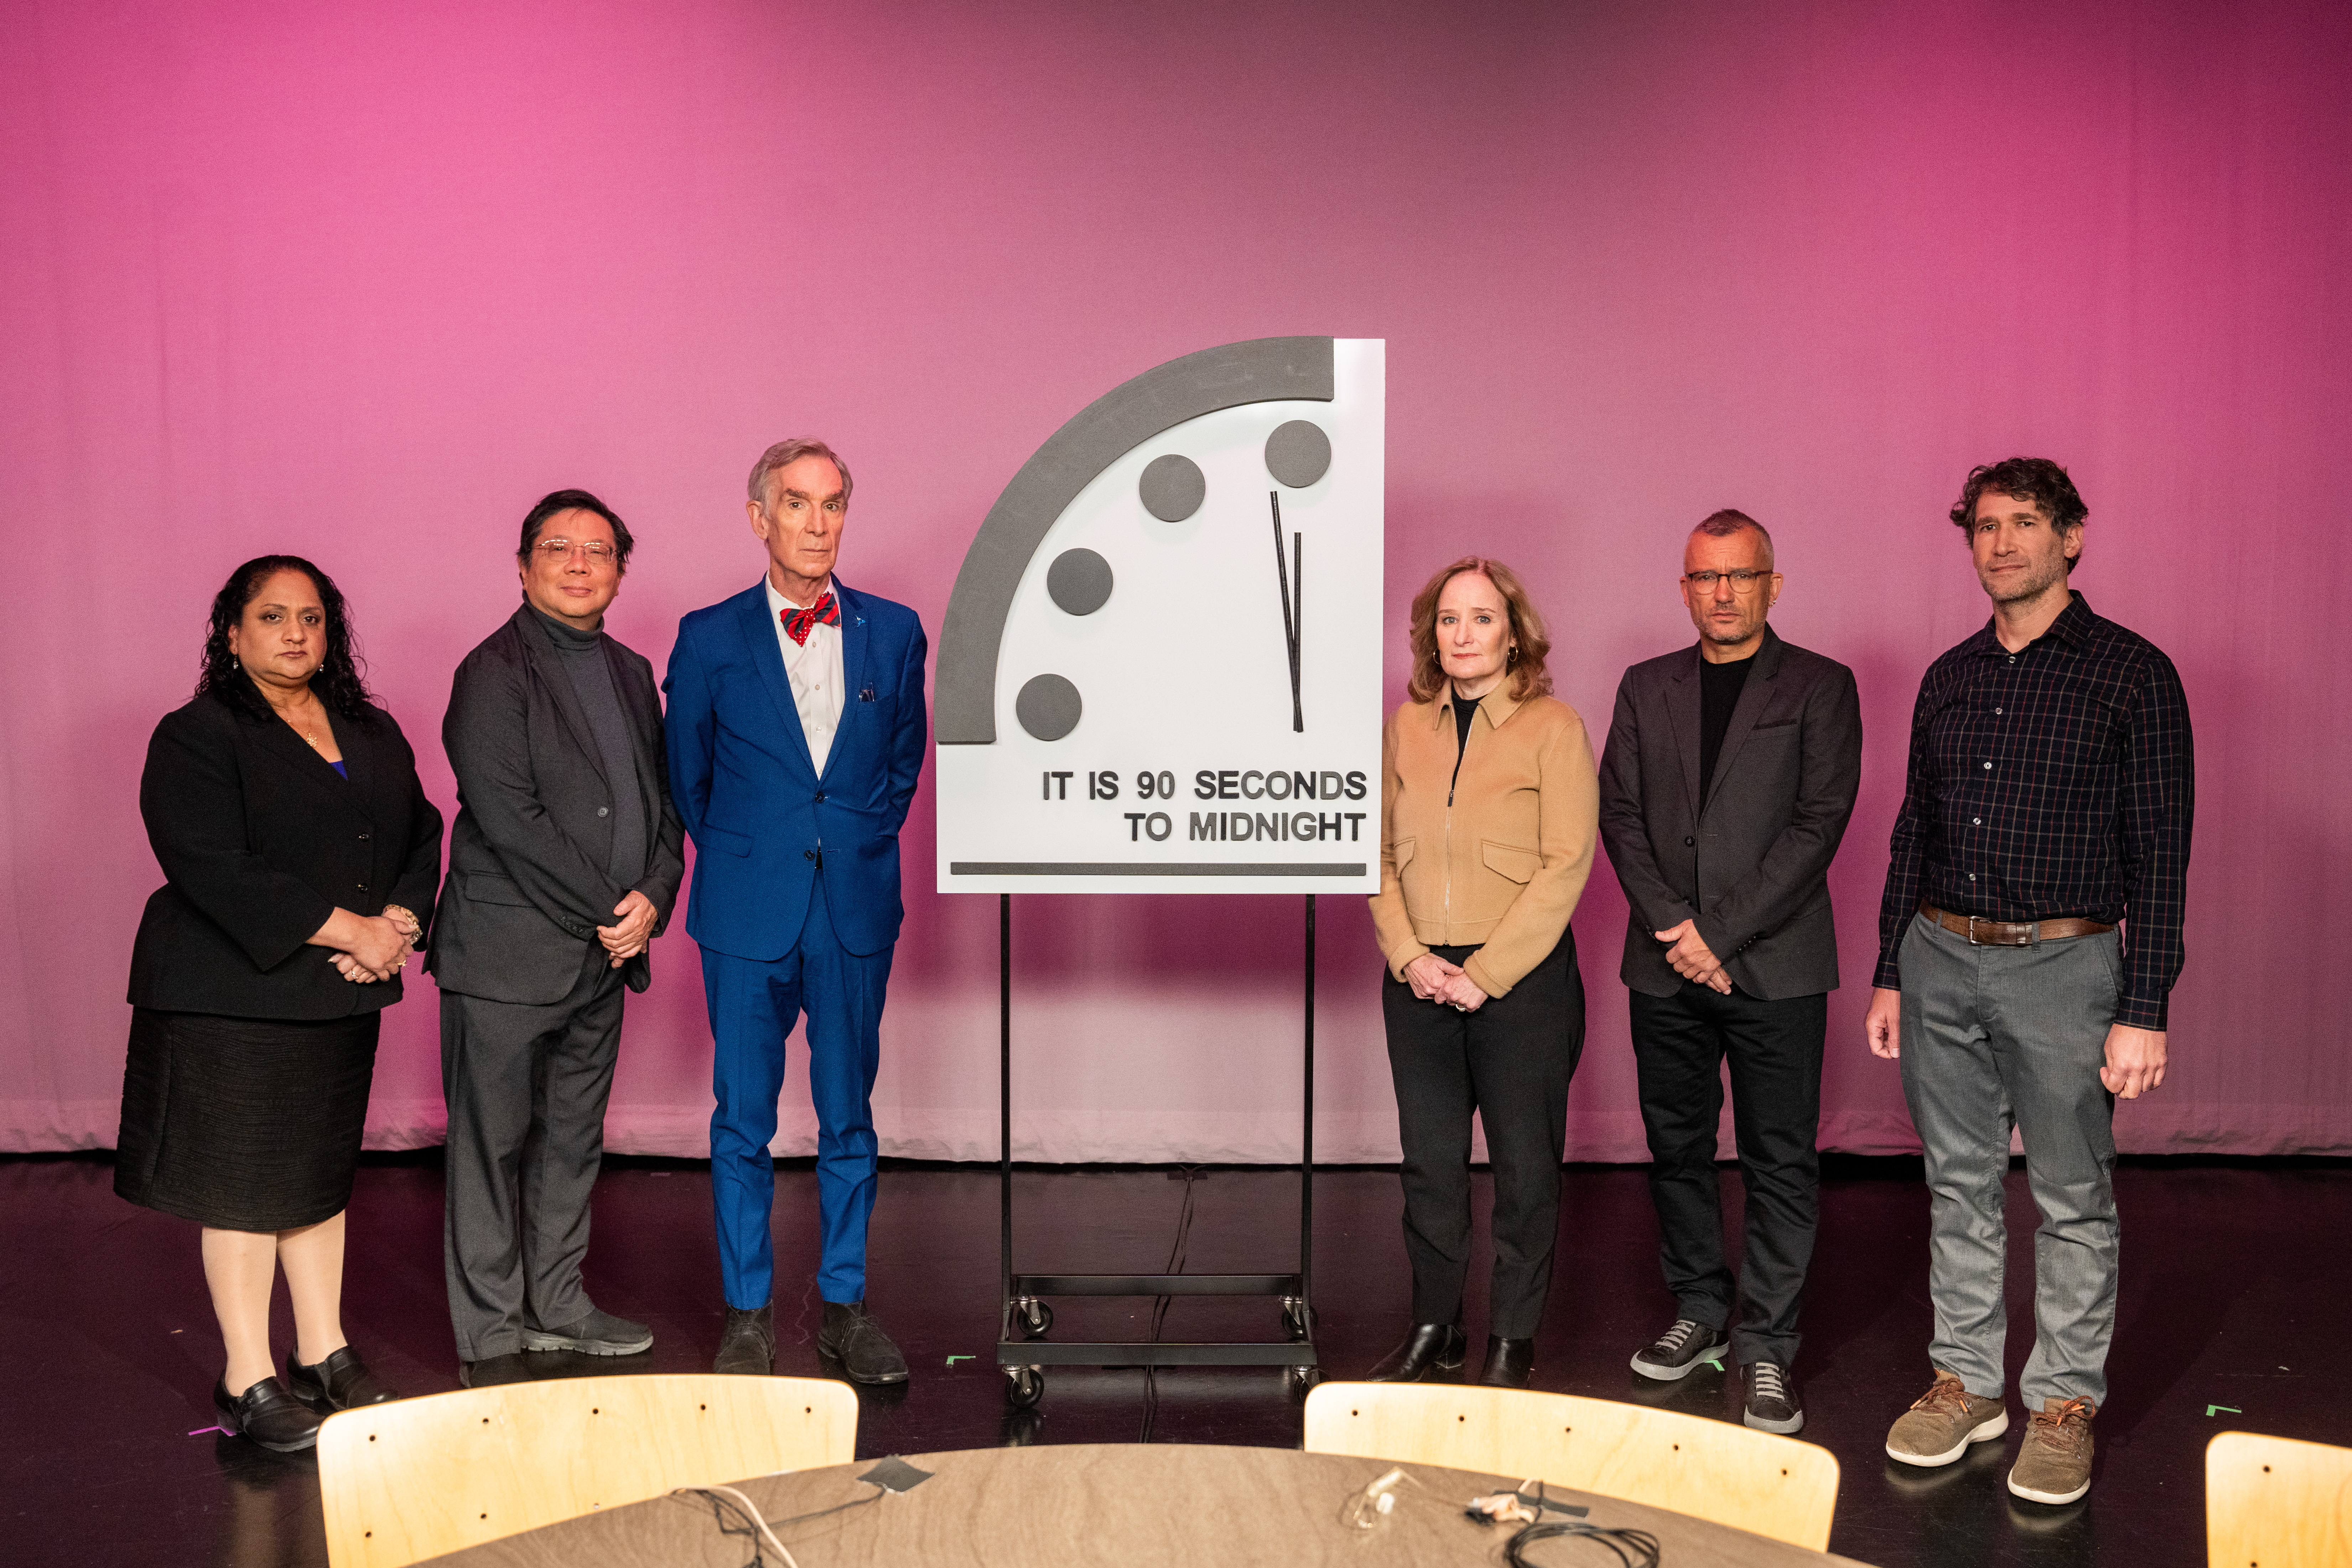 Group of people stand next to clock against pink background